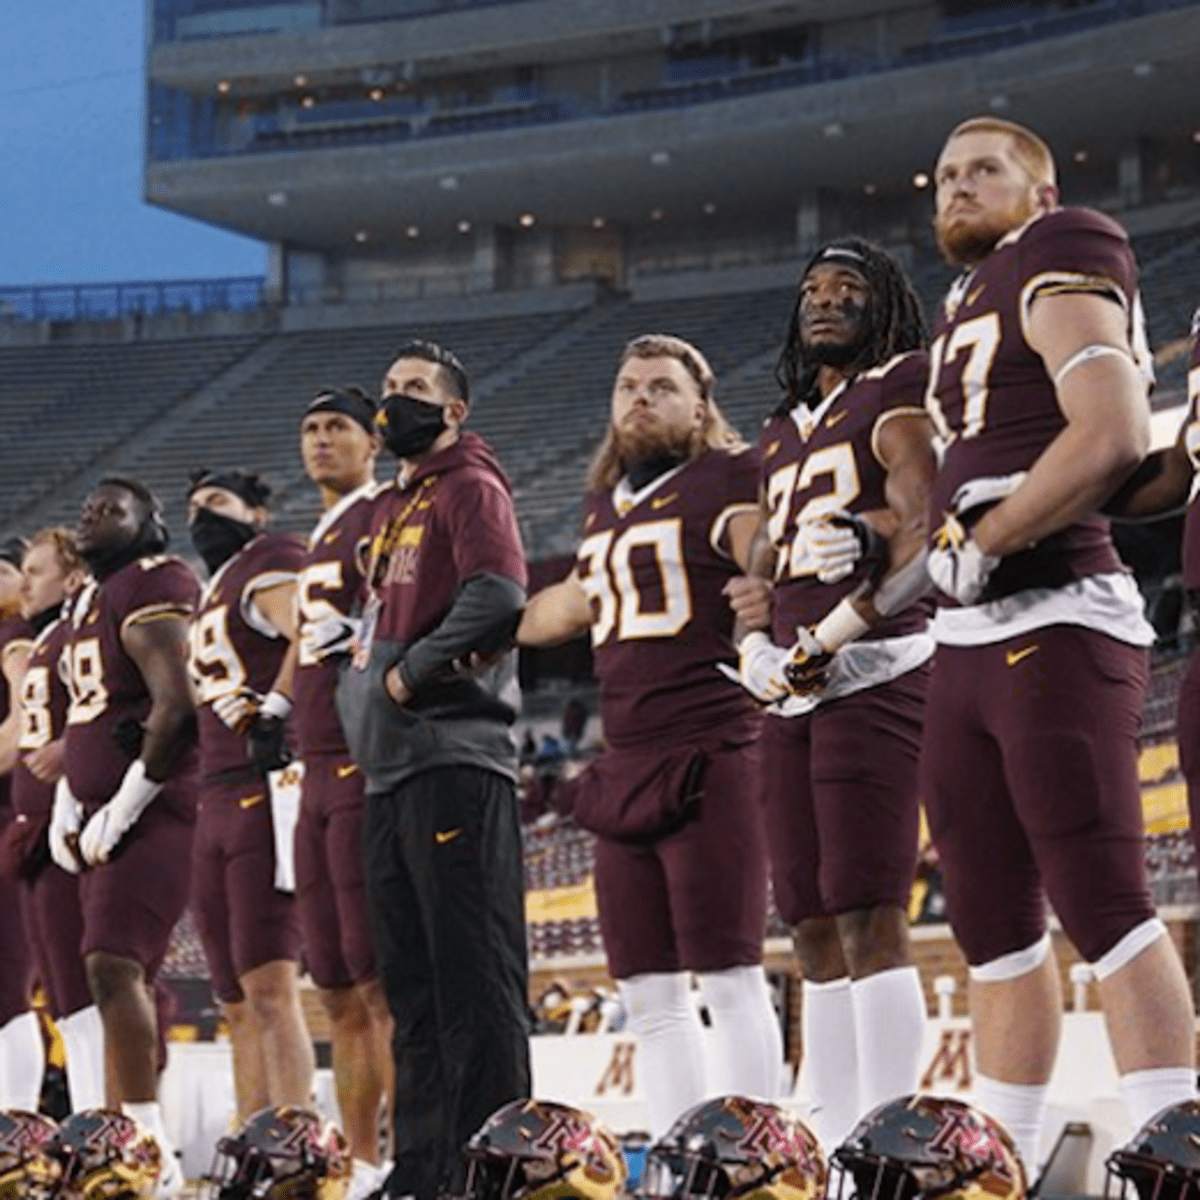 Minnesota 2022 Football Schedule Gopher Football's Game Vs. Iowa Moved In Modified 2022 Schedule - Bring Me  The News